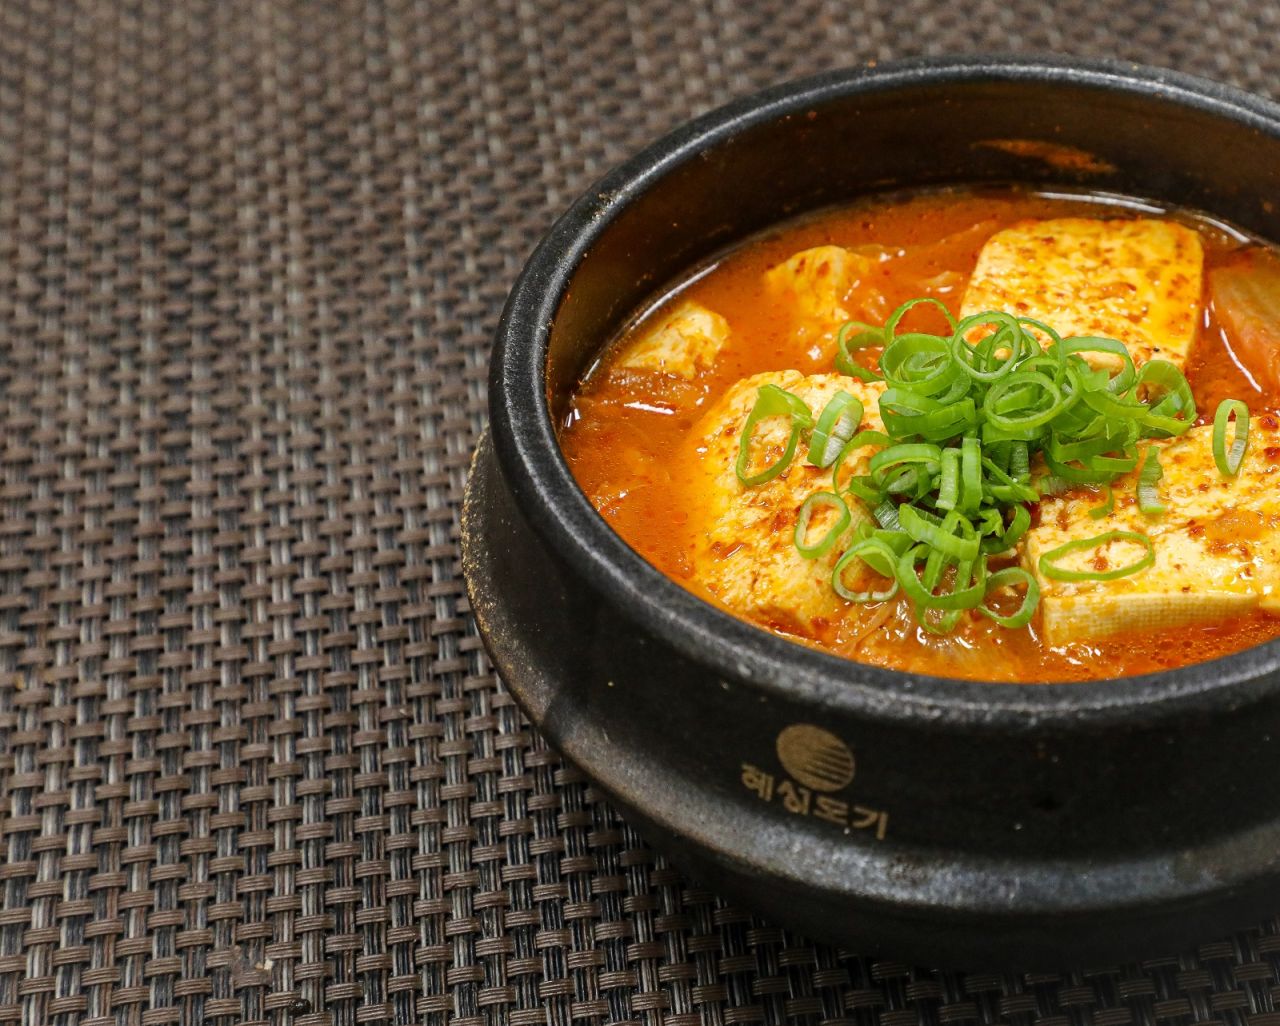 The restaurant serves up favorites including kimchi stew with tofu and shiitake mushrooms.